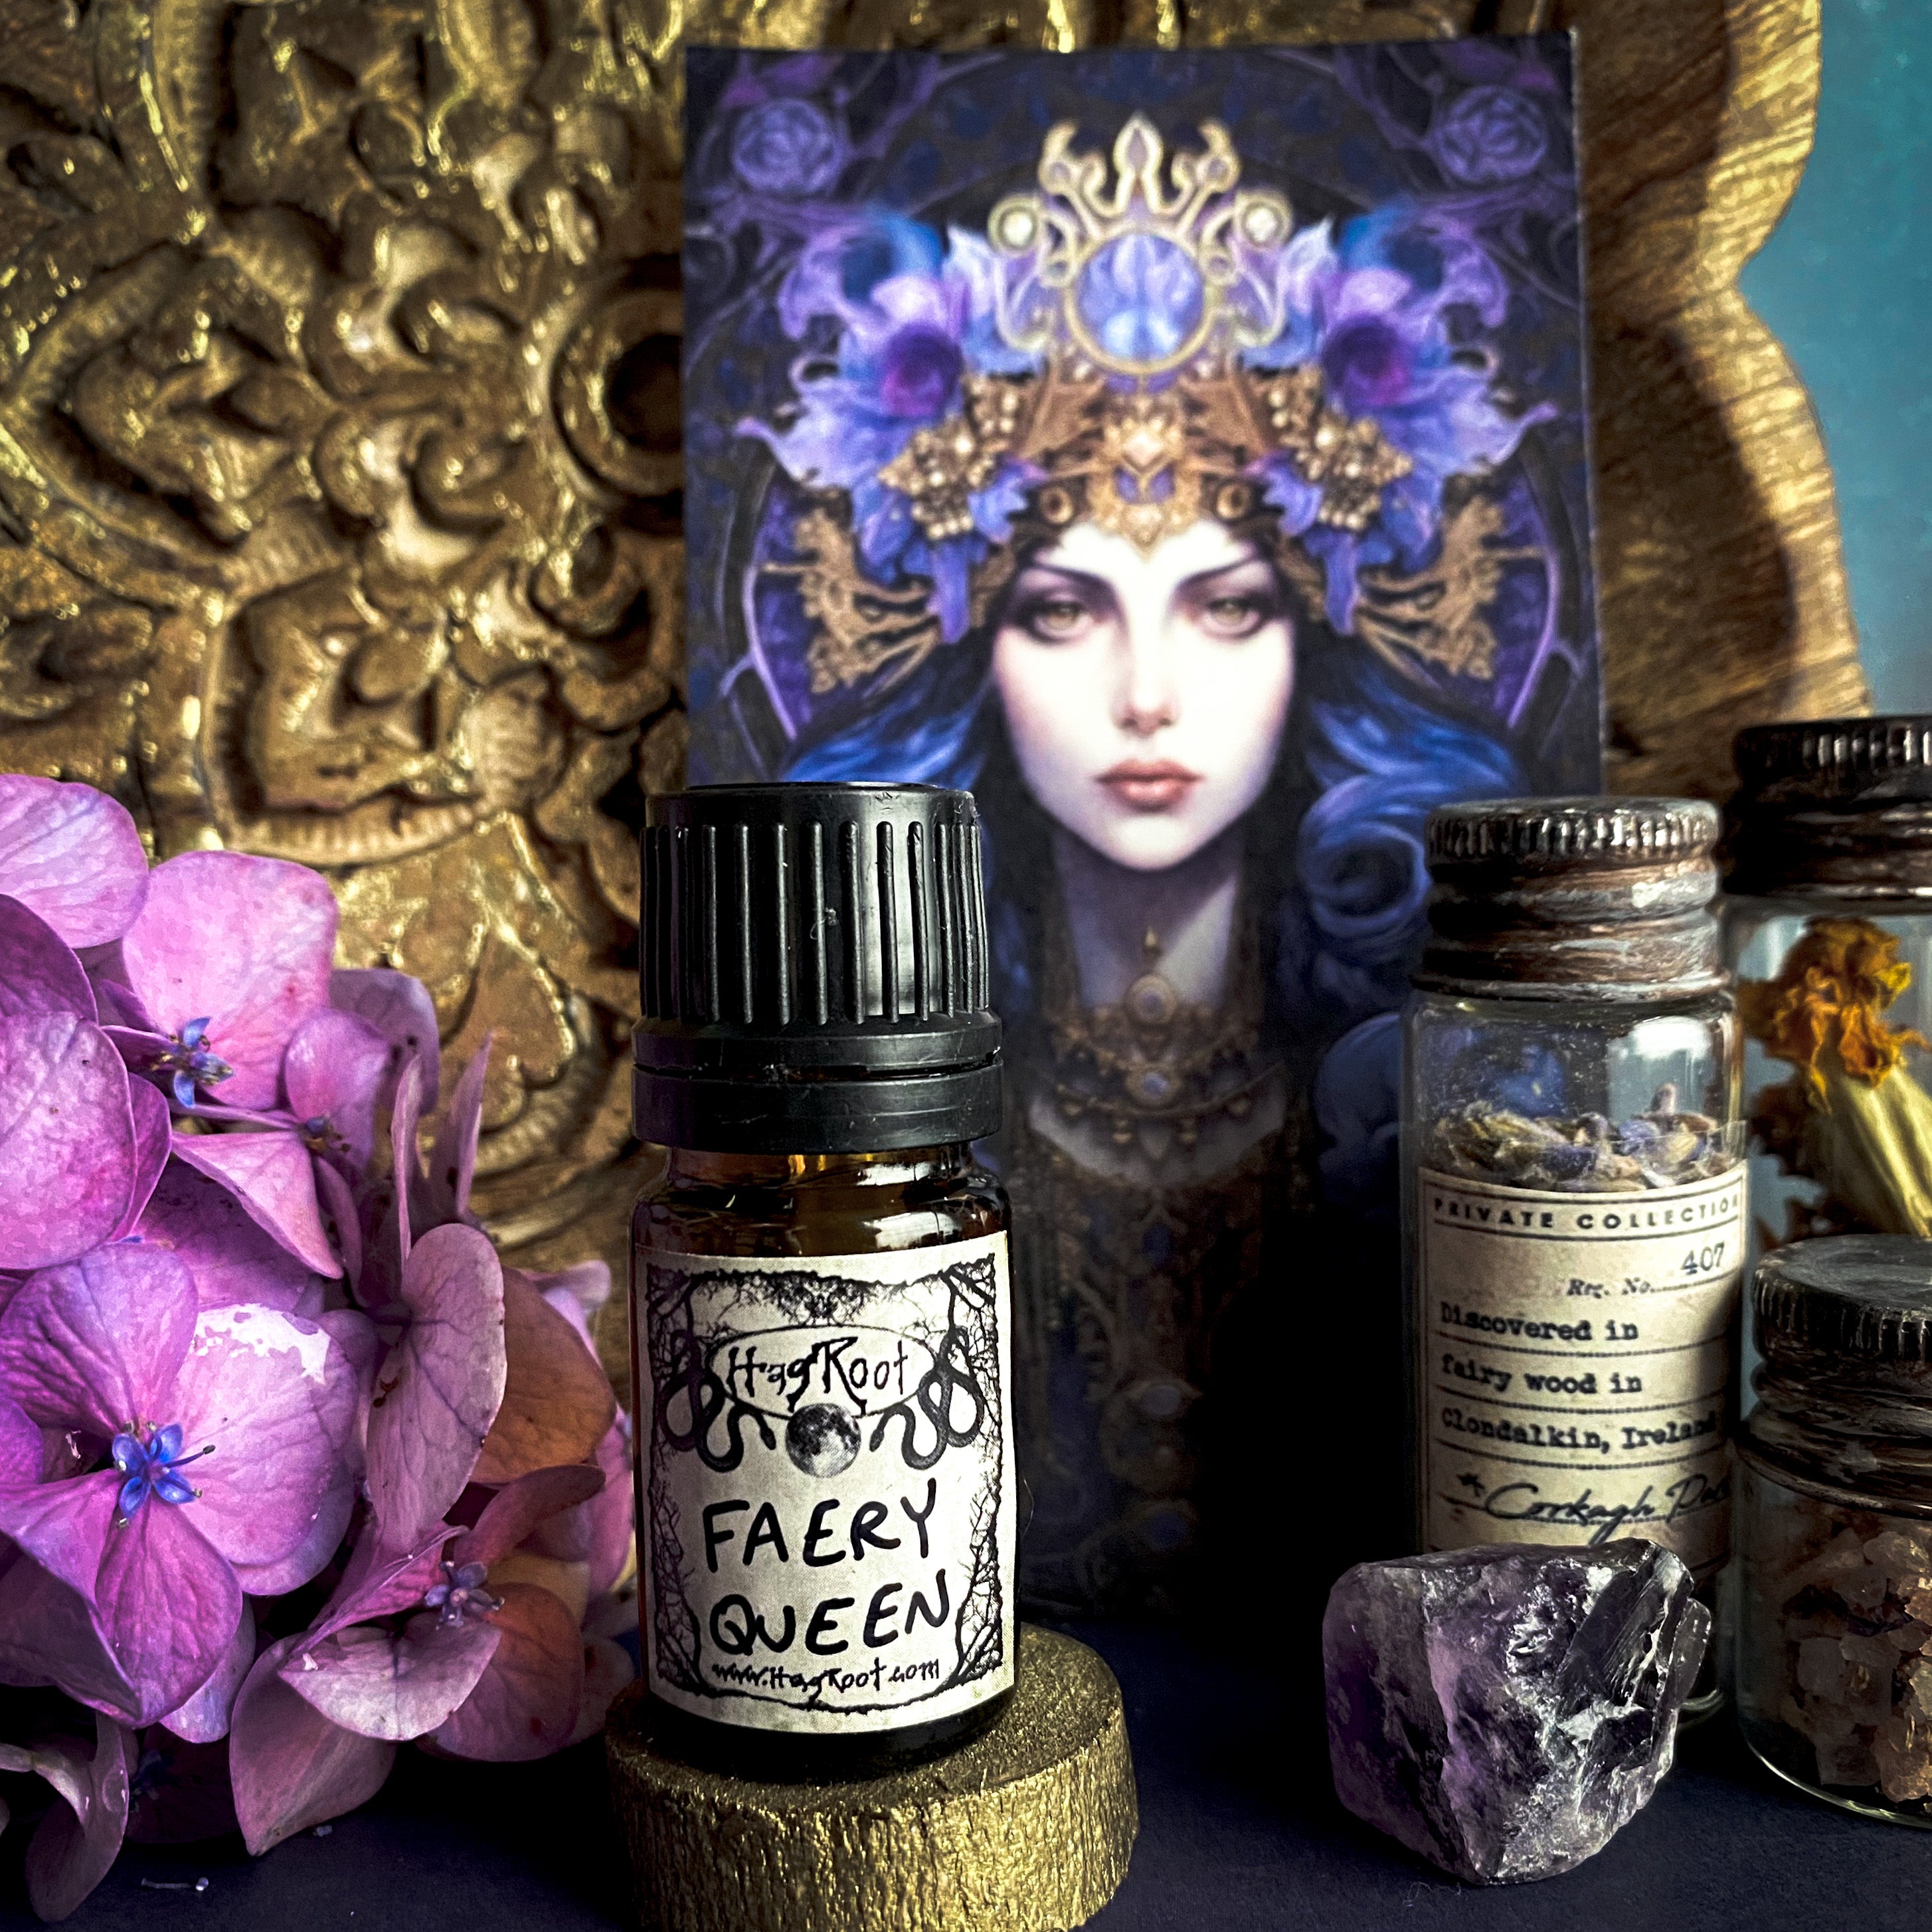 FAERY QUEEN-(Raspberry, Oak, Honeysuckle, Magnolia, Patchouli, Moss, Vanilla, Orchid, Vetiver)-Perfume, Cologne, Anointing, Ritual Oil